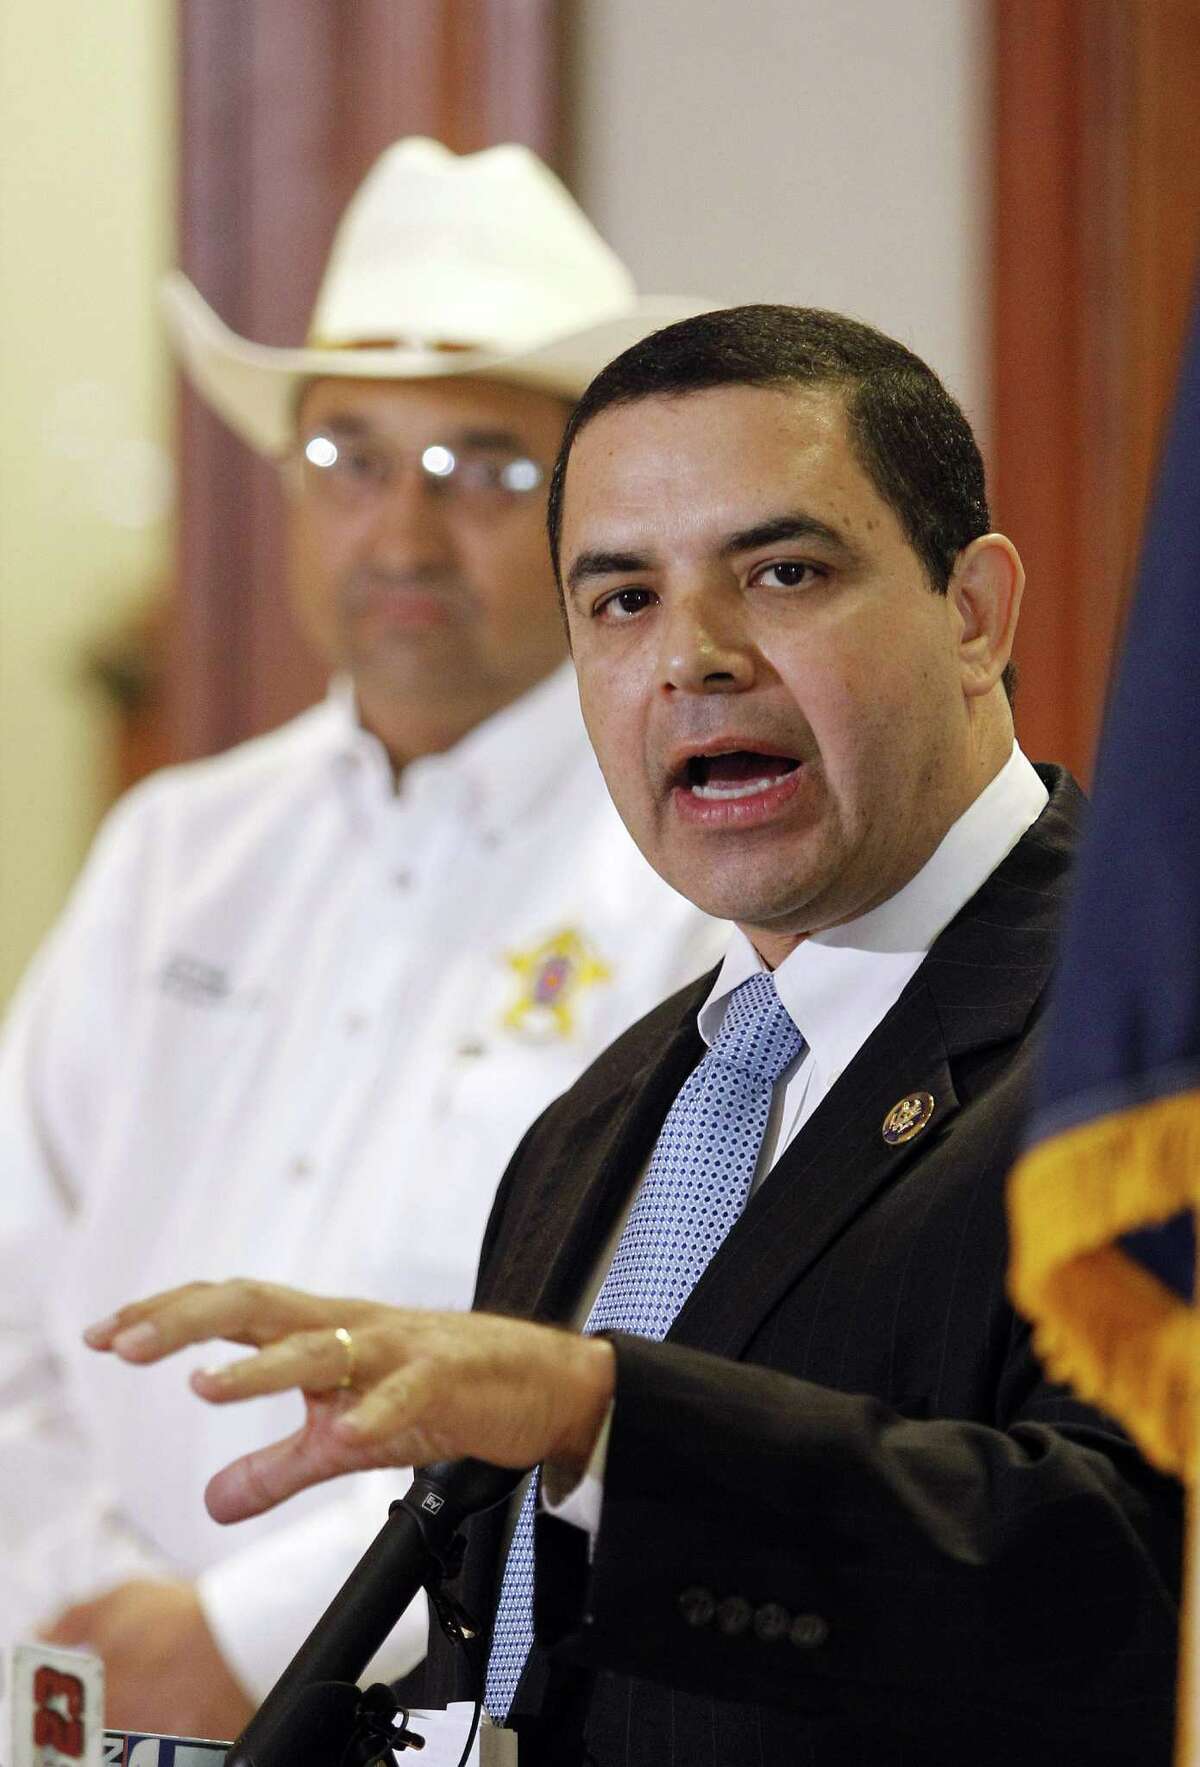 Democratic U.S. Rep. Henry Cuellar , who represents the state's 28th congressional district, which covers areas on the Northeast Side of San Antonio and Elmendorf, Floresville, Pleasanton and Jourdanton, plans to host a tele-town hall March 21. A spokesperson for Cuellar said the congressman did traditional town halls in the past but switched due to the size of the district.